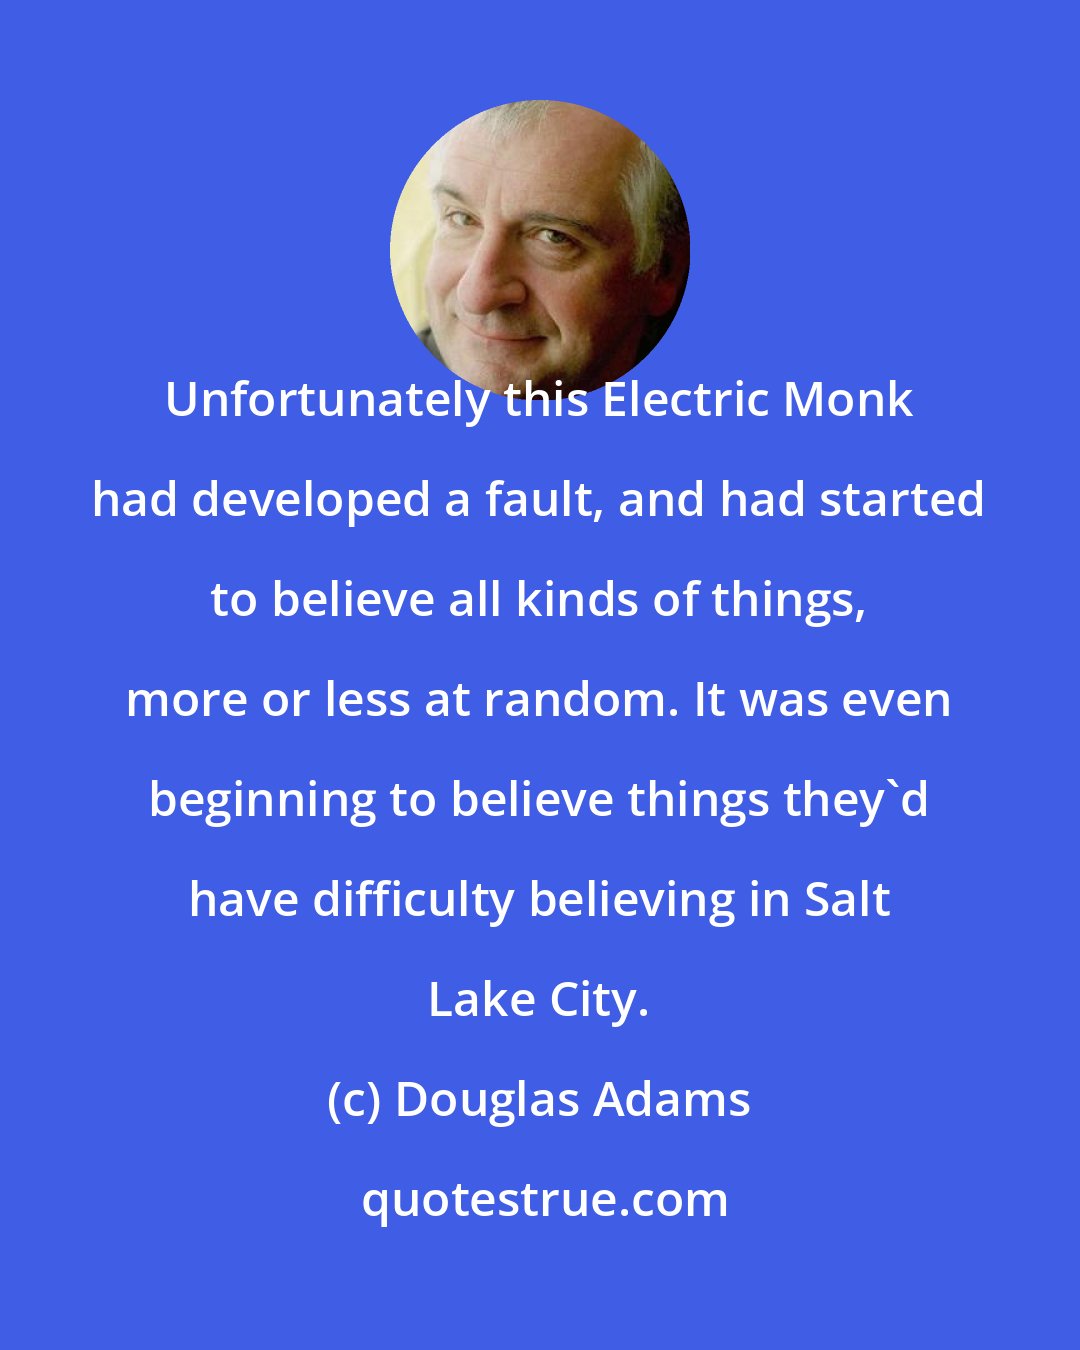 Douglas Adams: Unfortunately this Electric Monk had developed a fault, and had started to believe all kinds of things, more or less at random. It was even beginning to believe things they'd have difficulty believing in Salt Lake City.